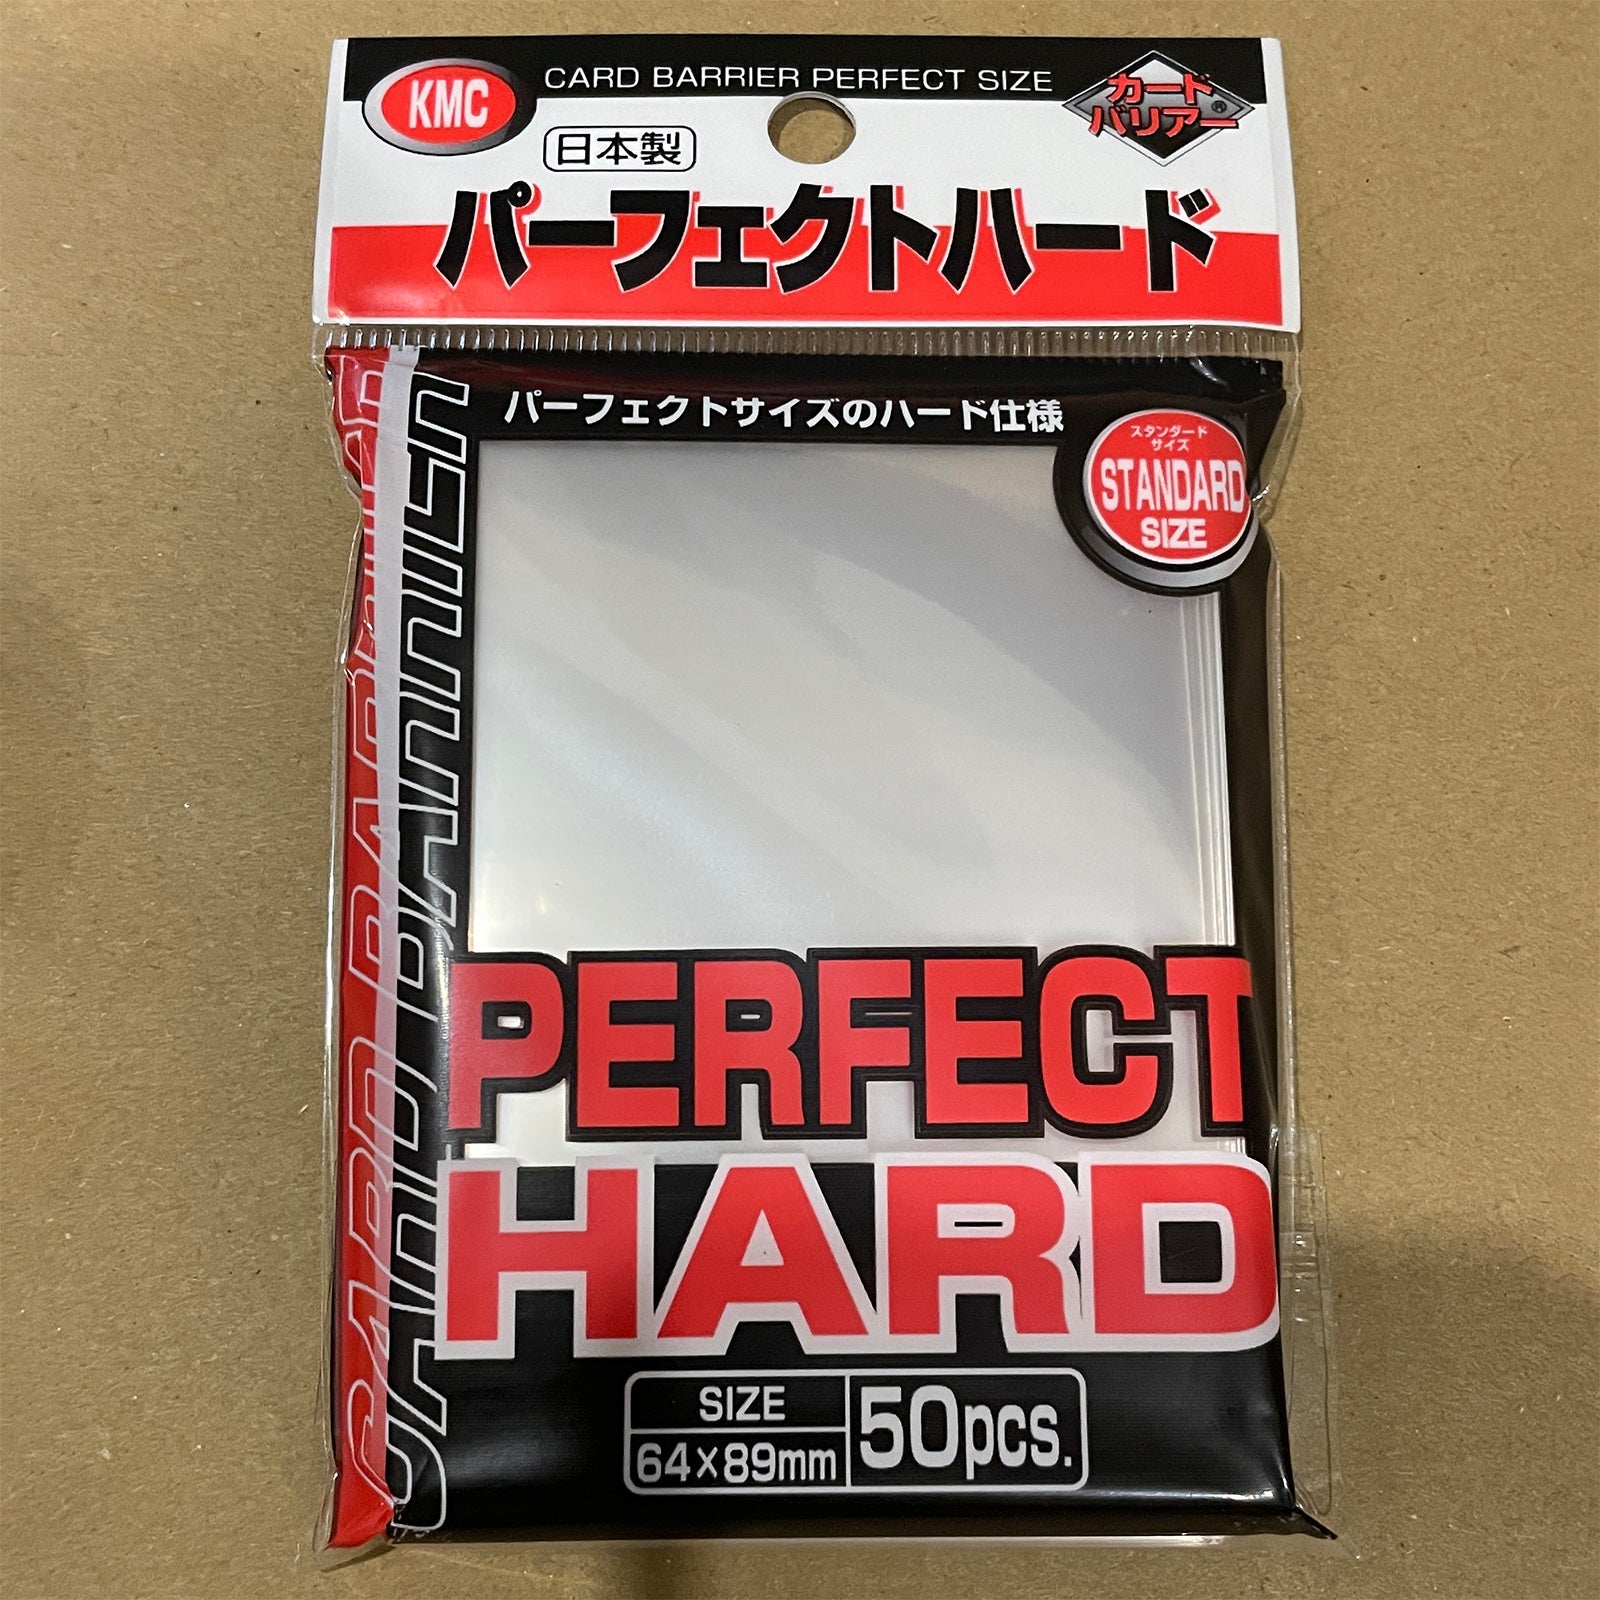 KMC - Perfect Fit Hard (50pc)